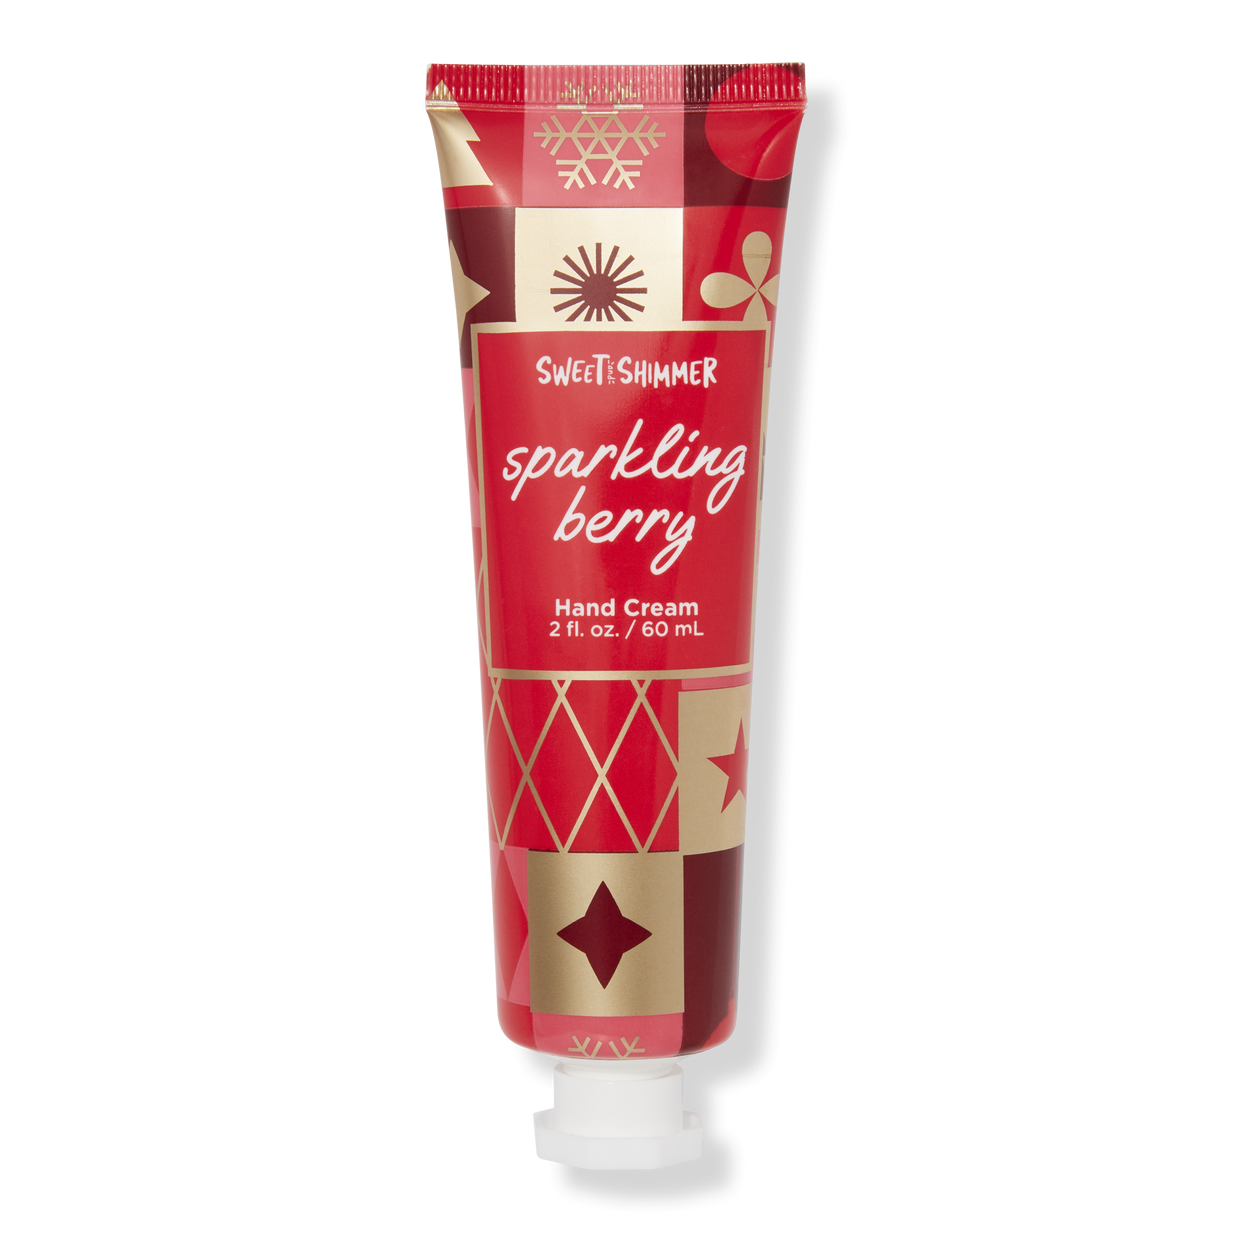 Sweet & Shimmer Sparkling Berry Scented Hand Cream